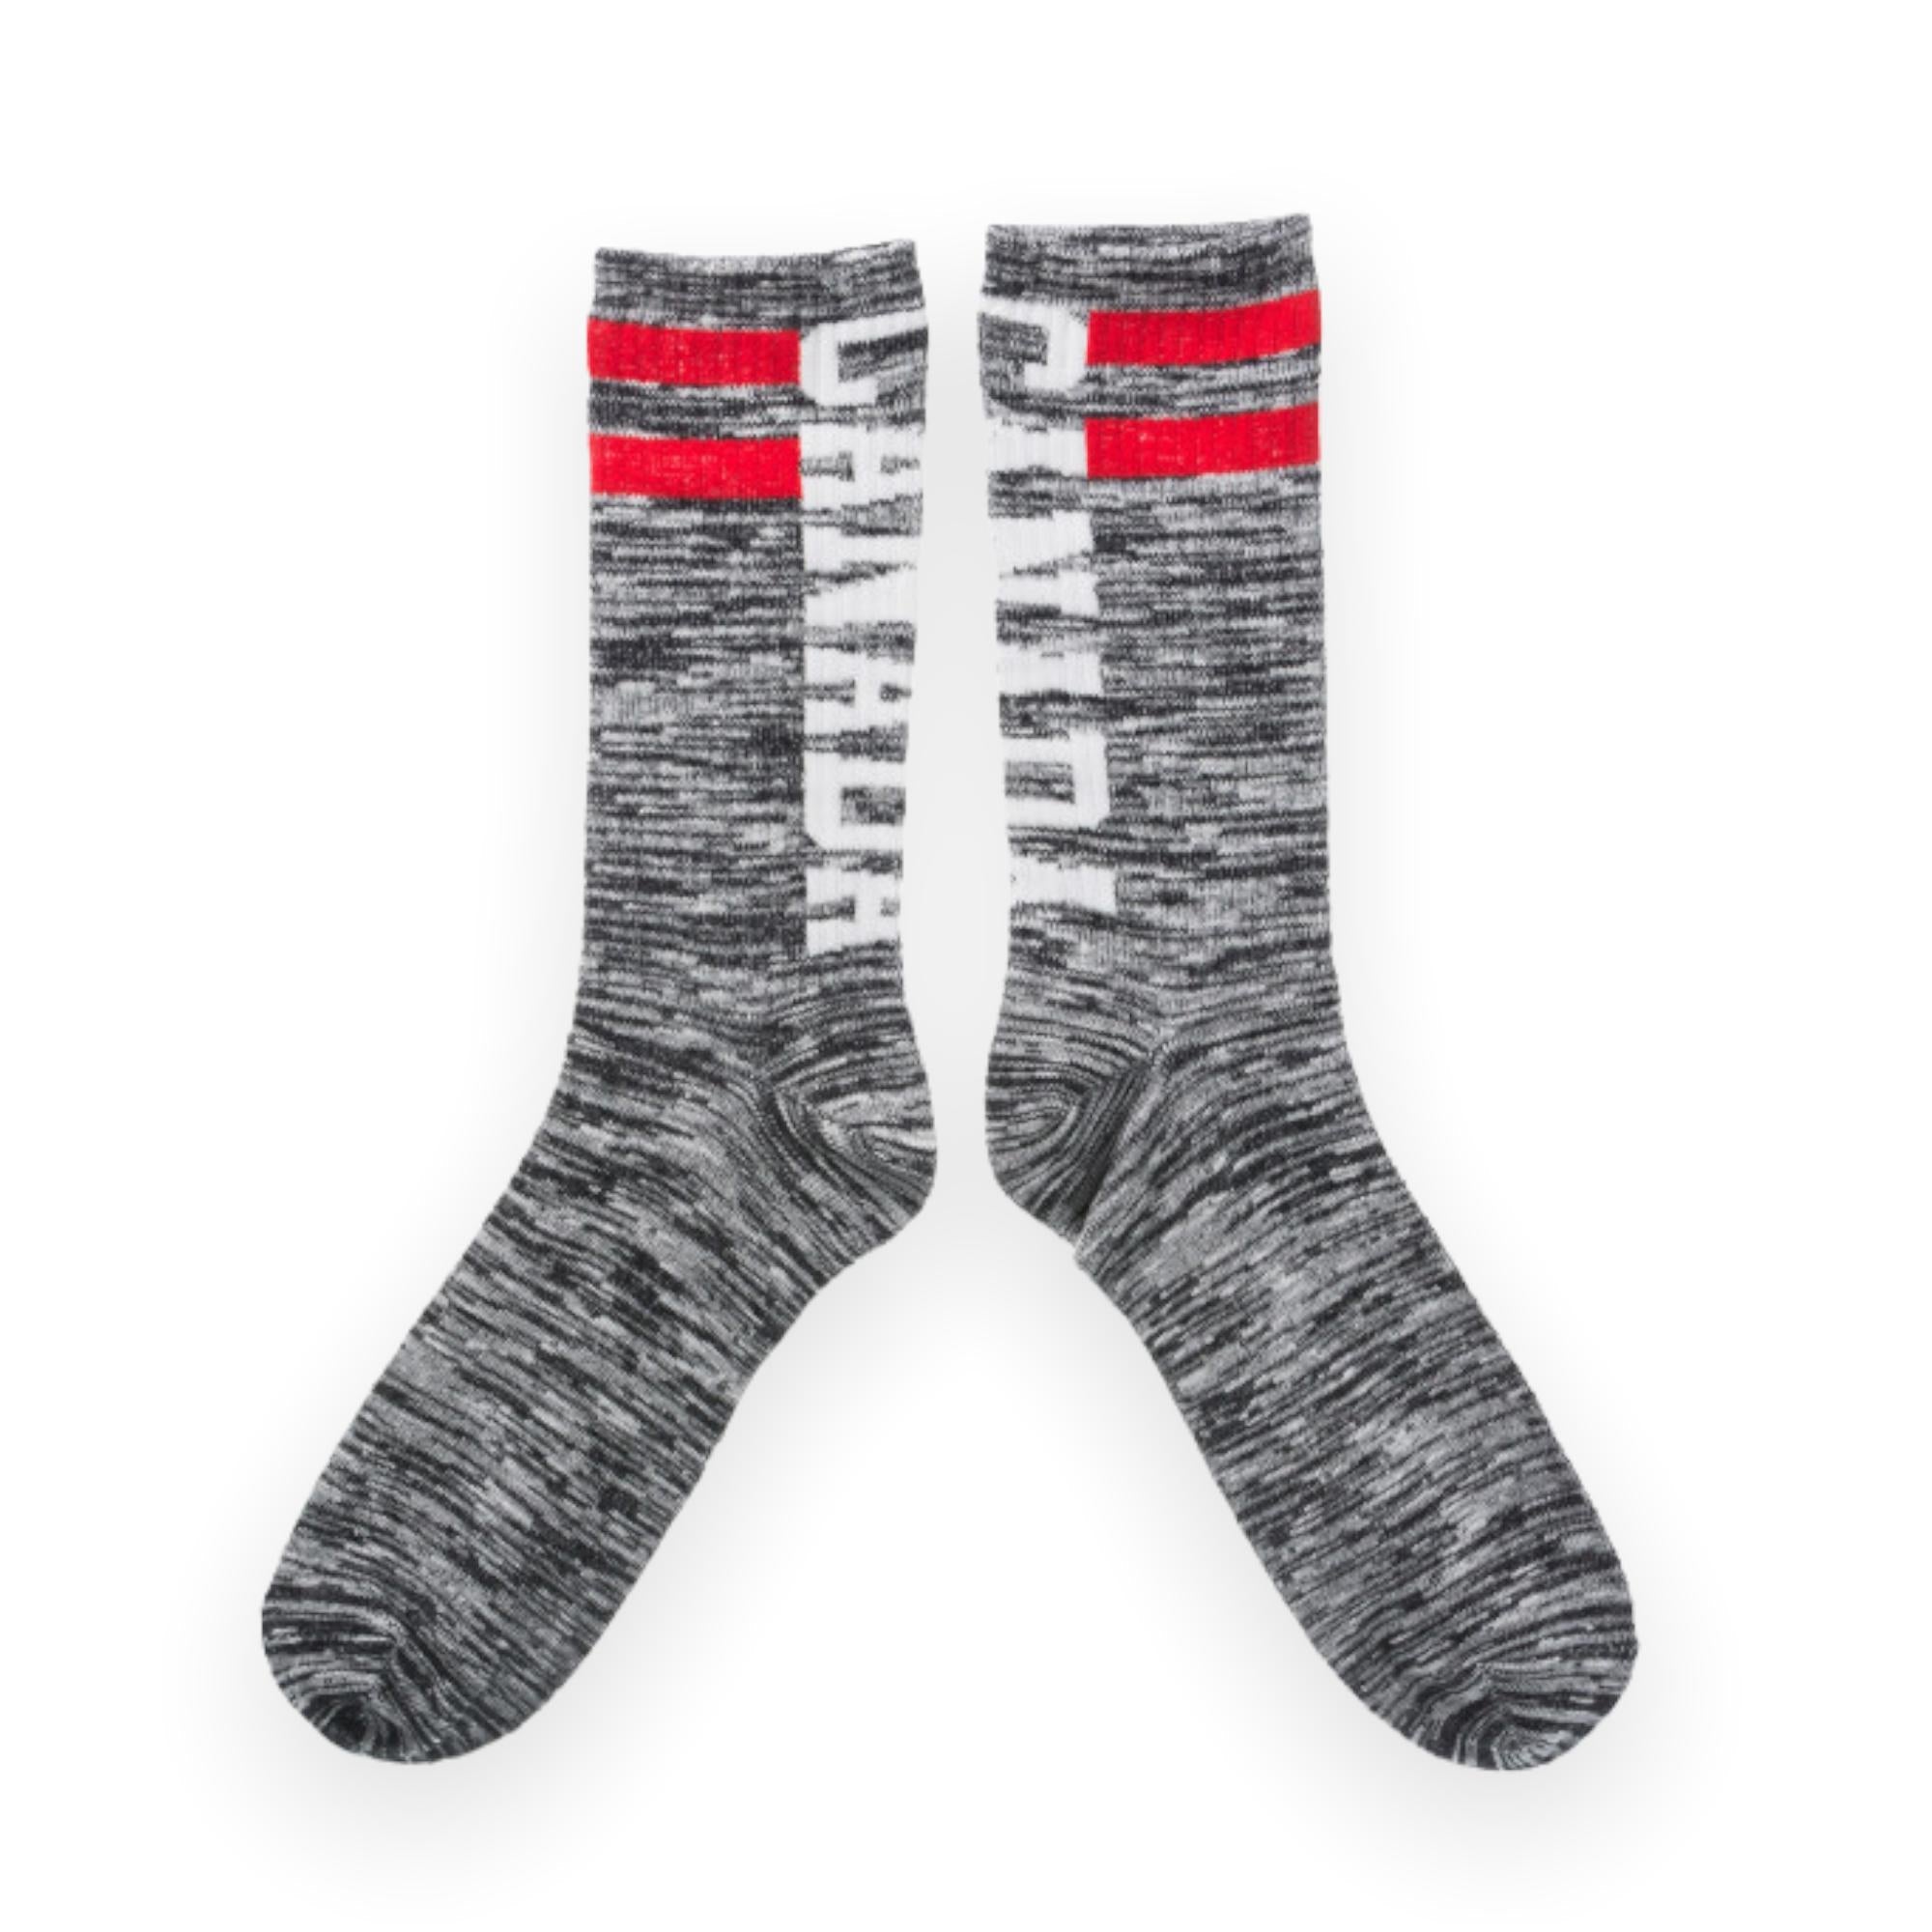 Socks - Salt and Pepper W/ Red Lines Canada Pattern Adult Unisex